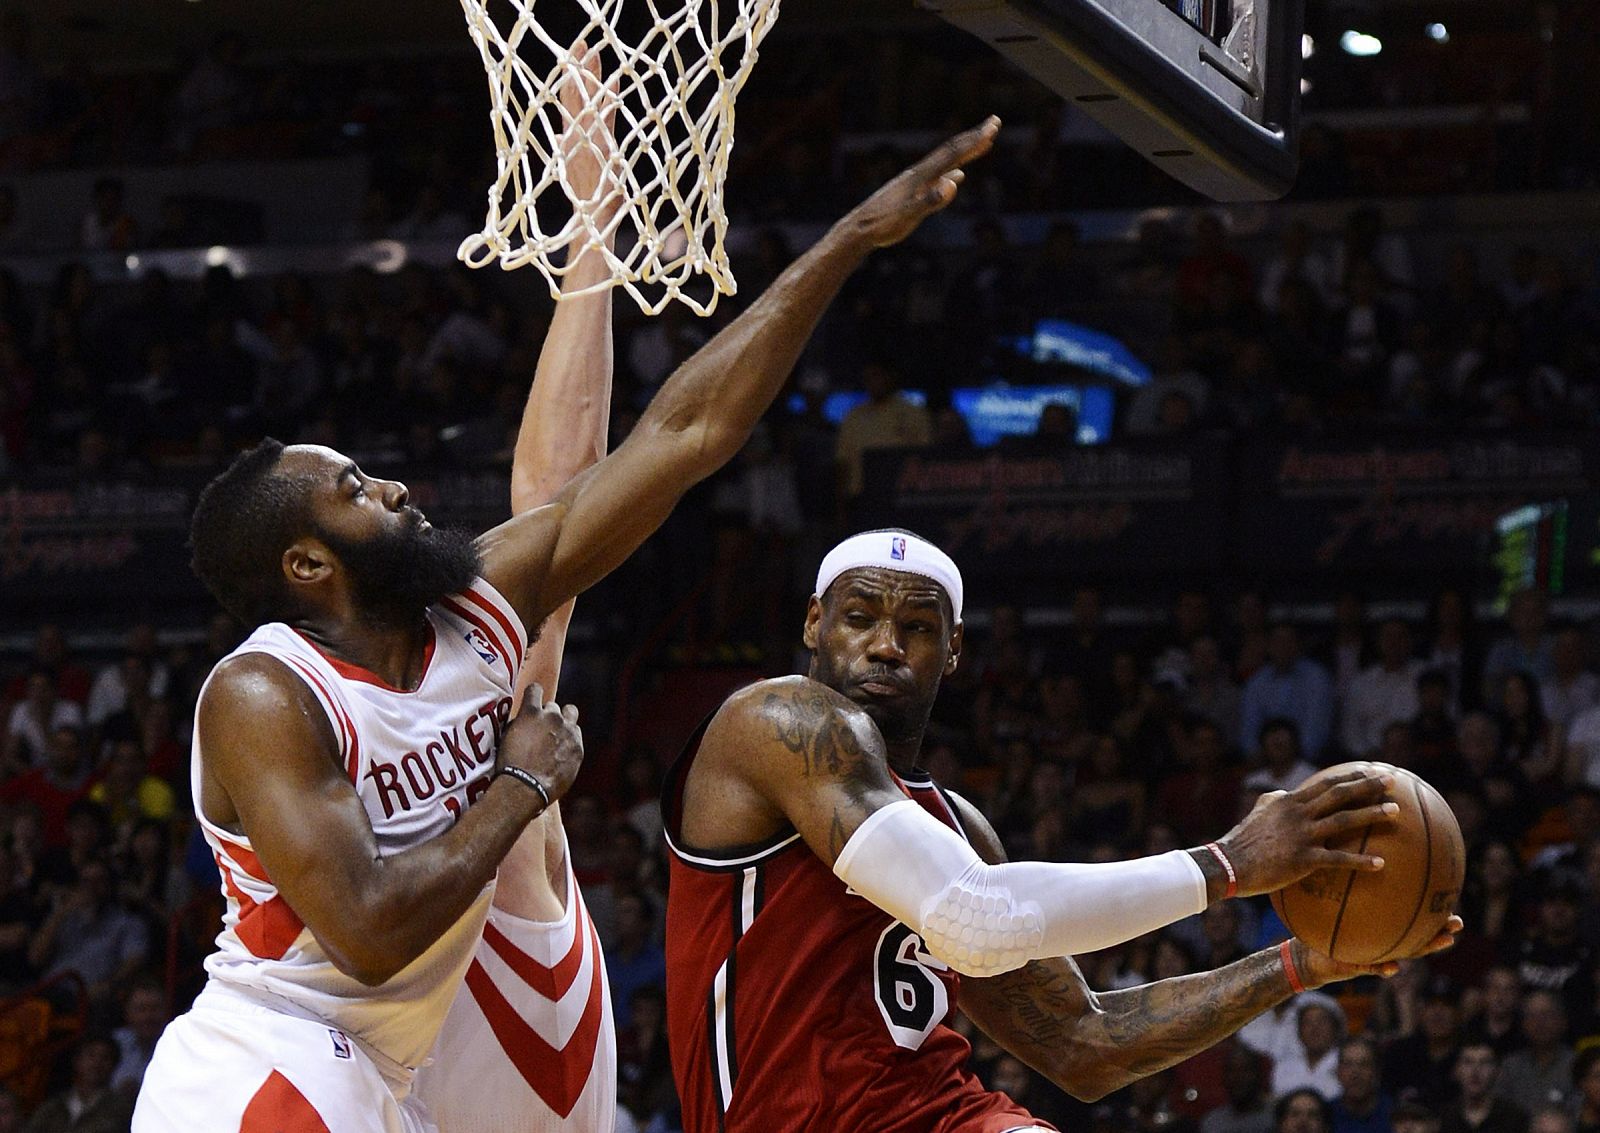 Miami Heat's James is defended by Houston Rockets' Aldrich and Harden during their NBA basketball game in Miami